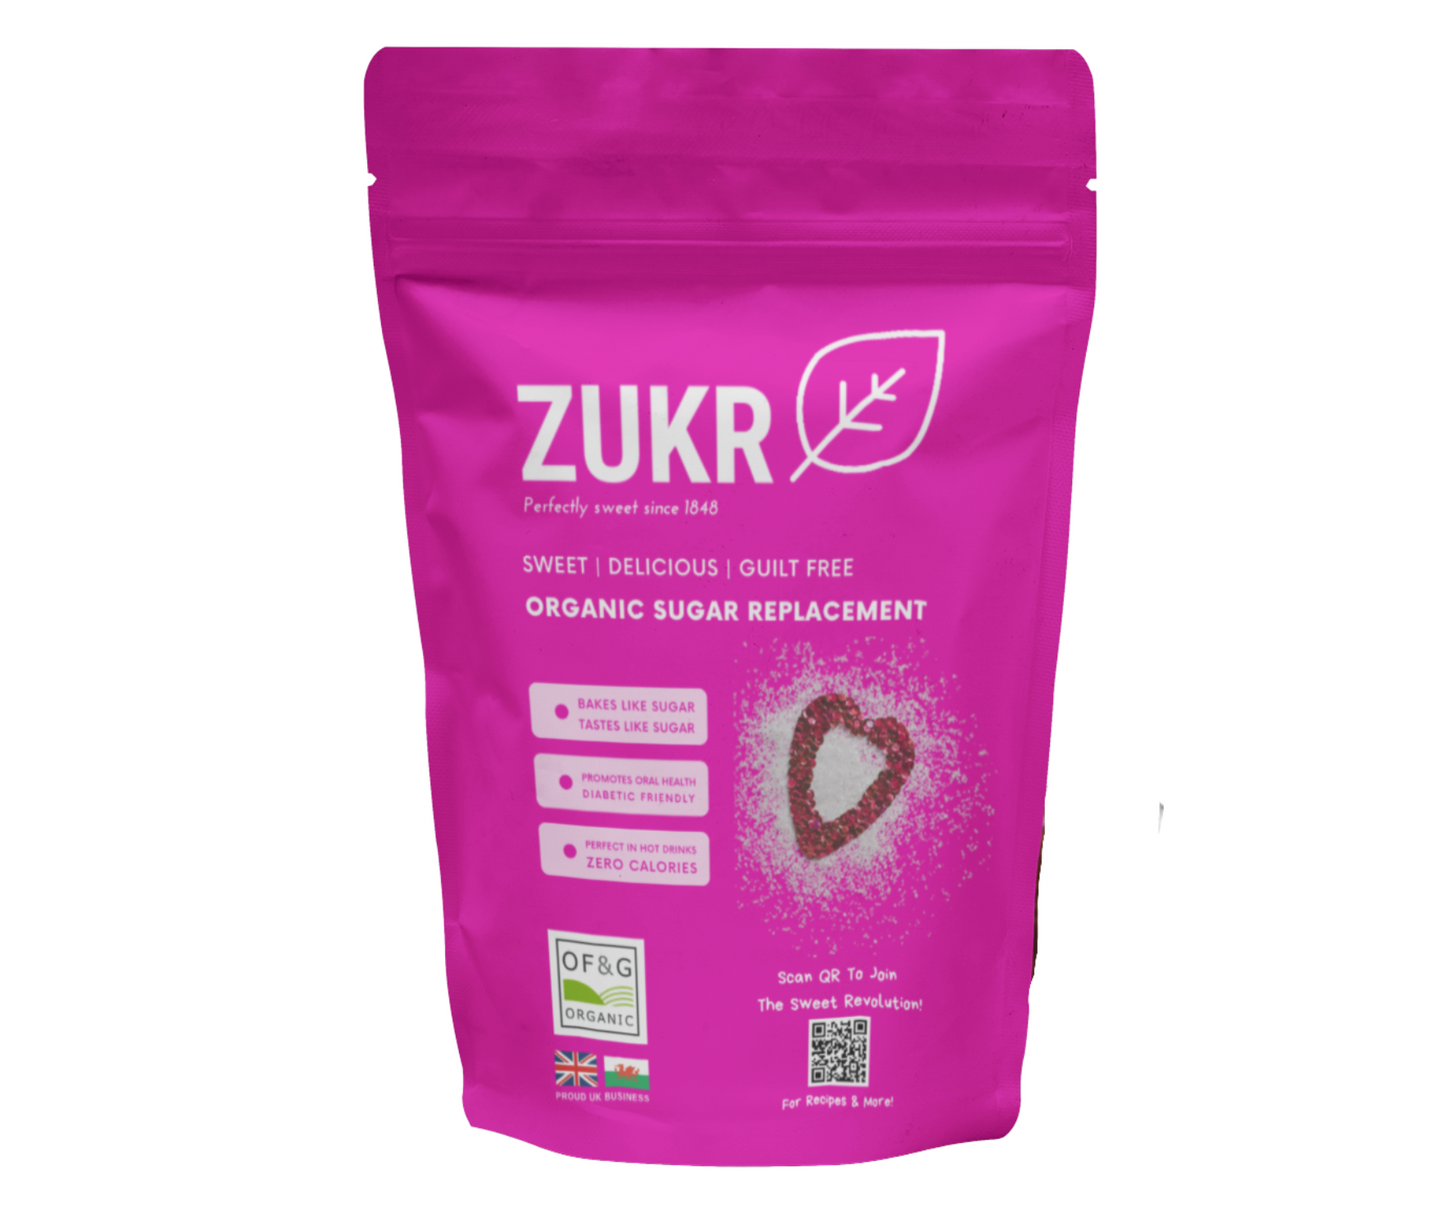 A vibrant pink resealable bag of ZUKR Natural Organic Sugar Replacement, a zero-calorie, zero-GI sugar alternative perfect for healthy cooking and baking.